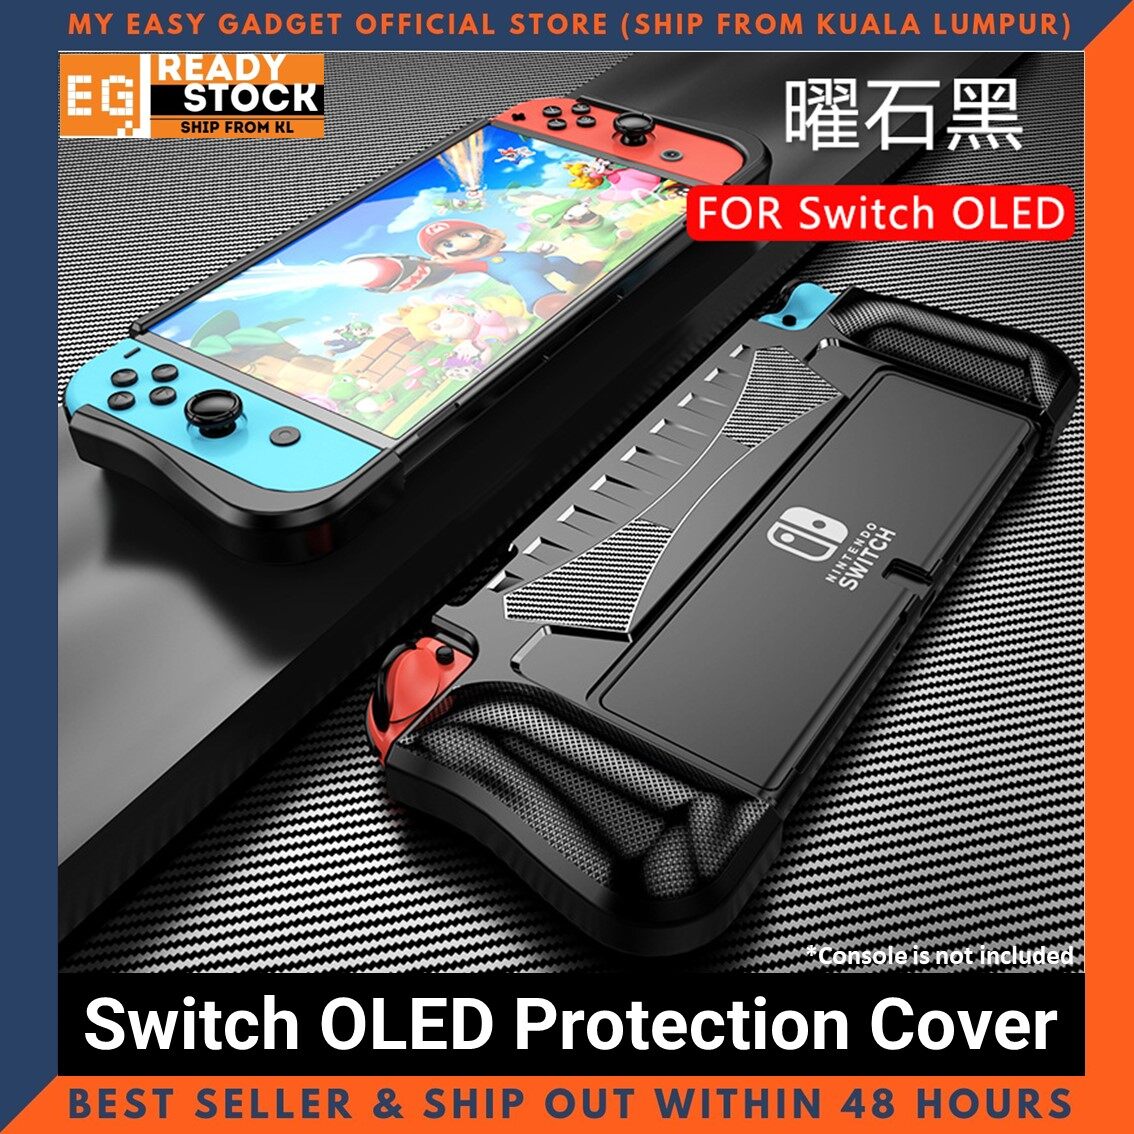 TPU Case Shock Proof Protection Cover Shell Ergonomic Handle Grip for Nintendo Switch OLED